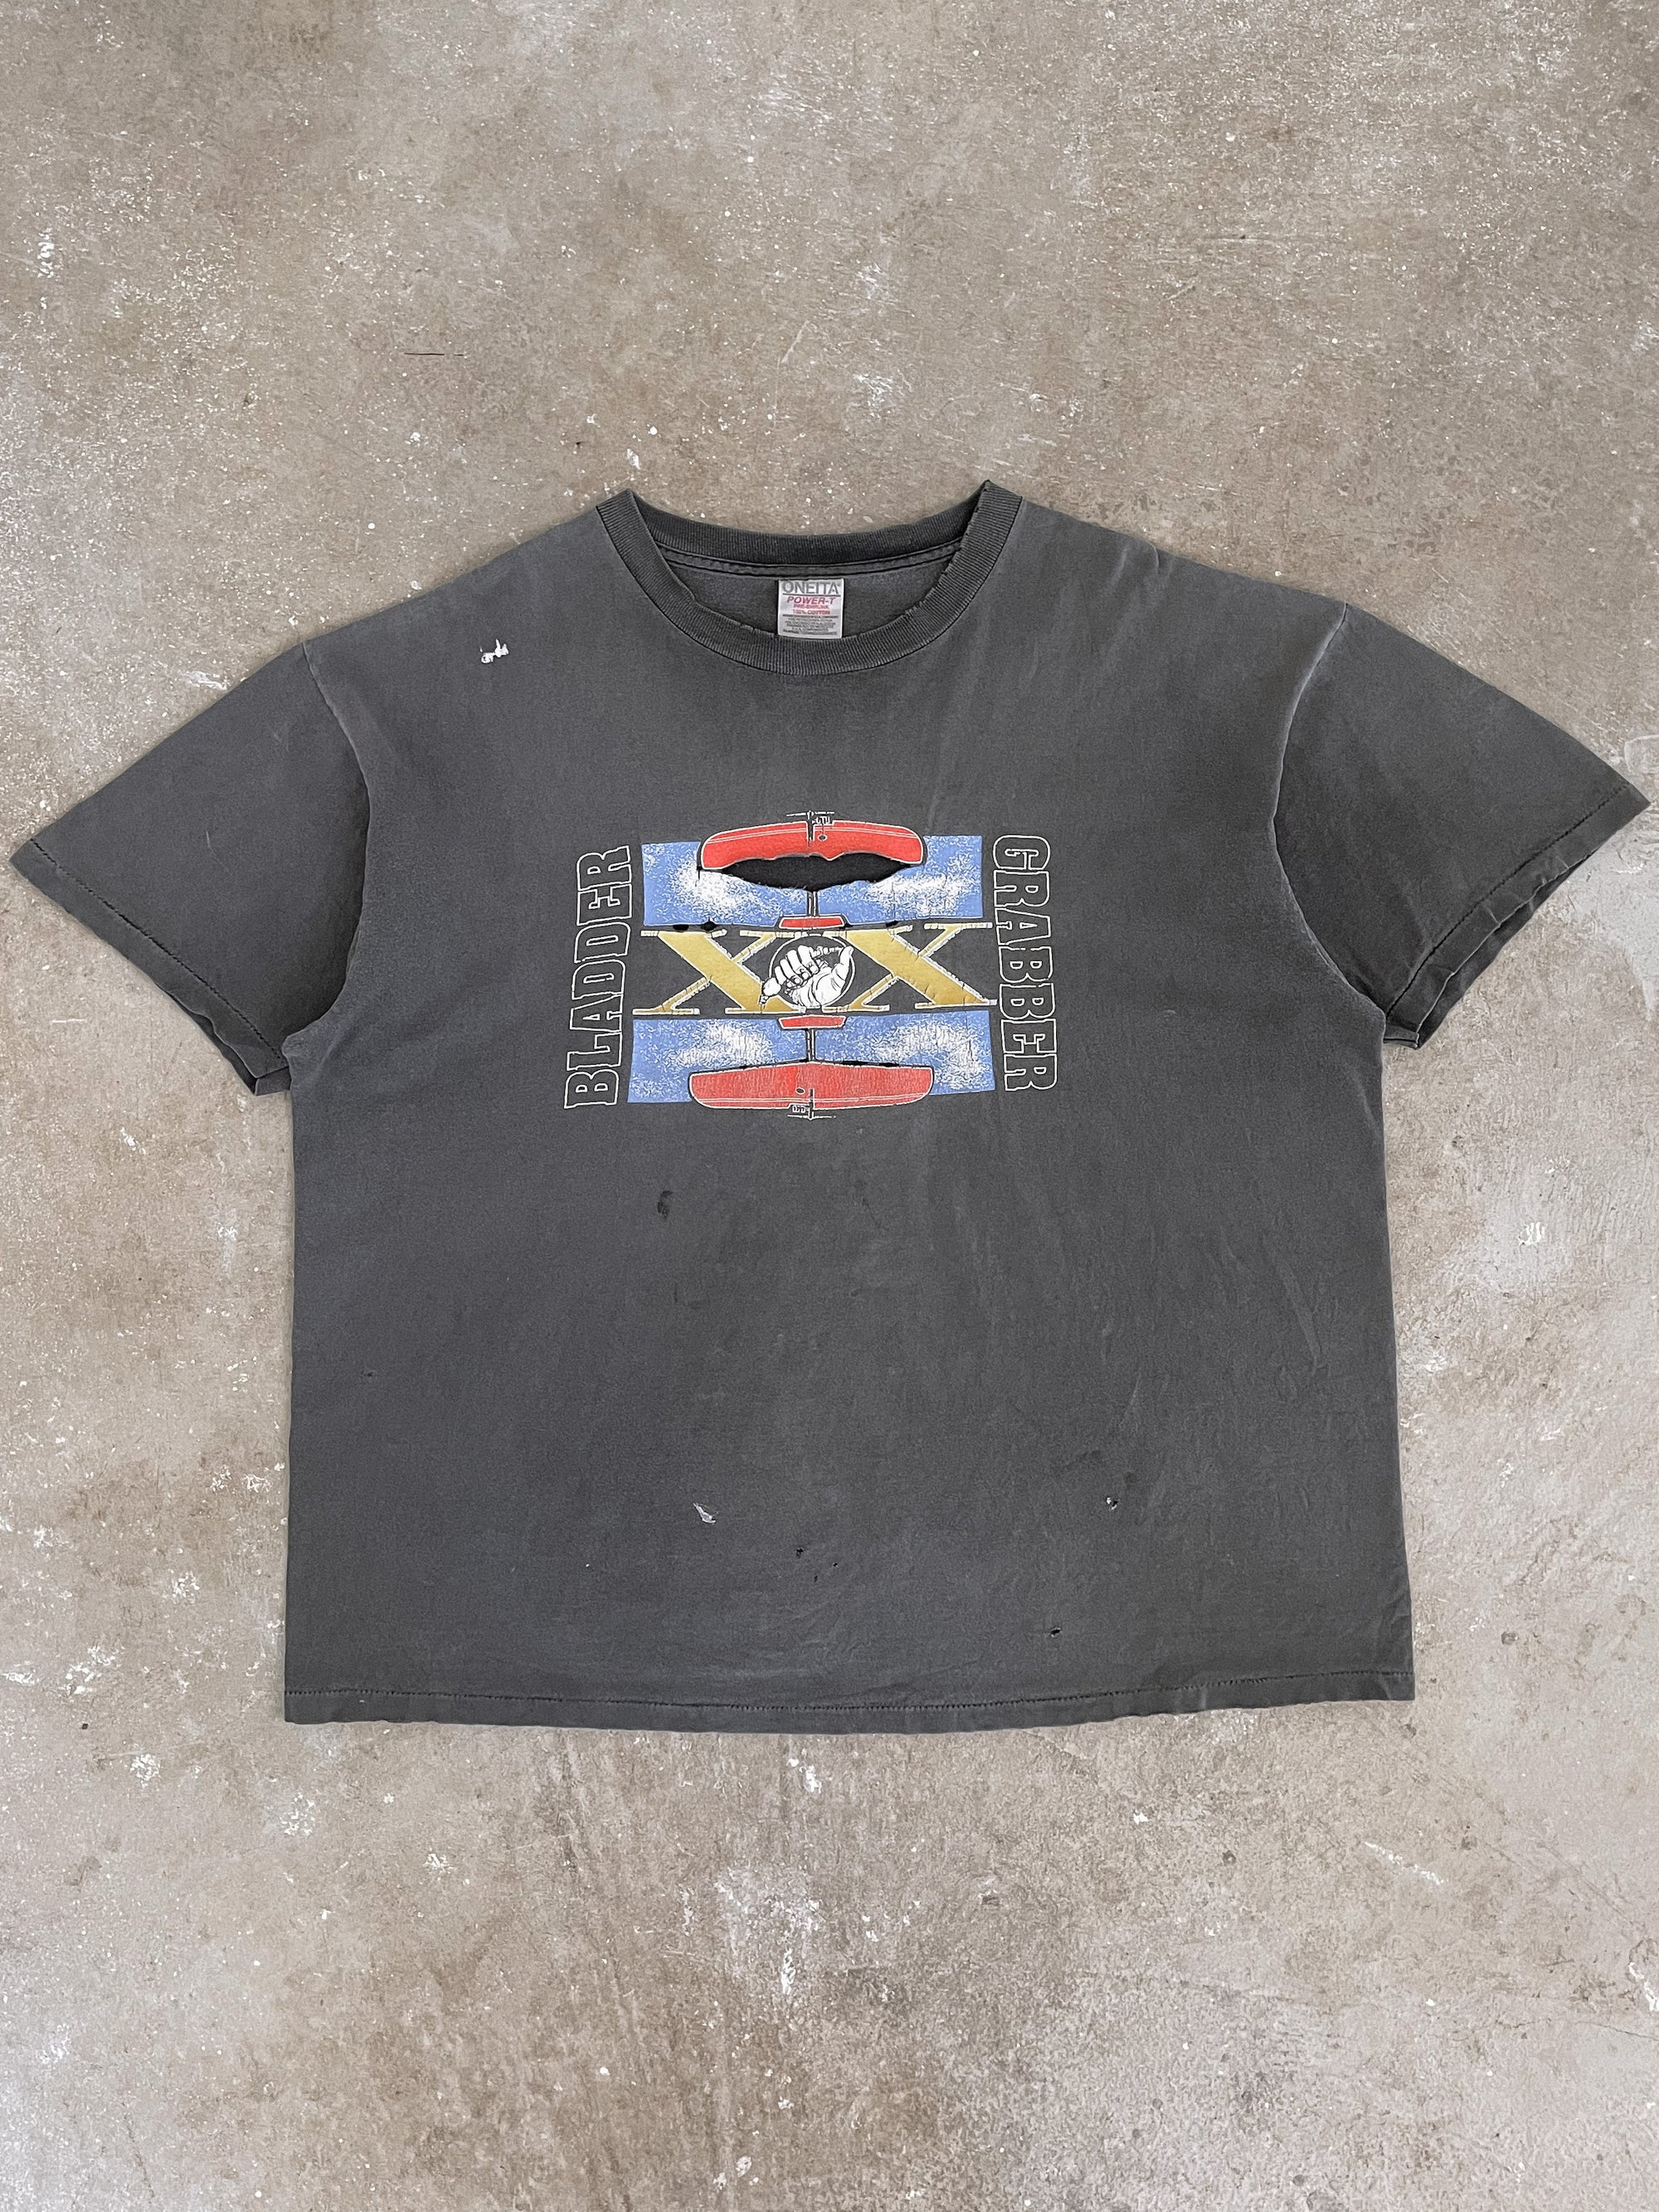 1990s “Bladder Grabber” Distressed Faded Single Stitched Tee (XL)